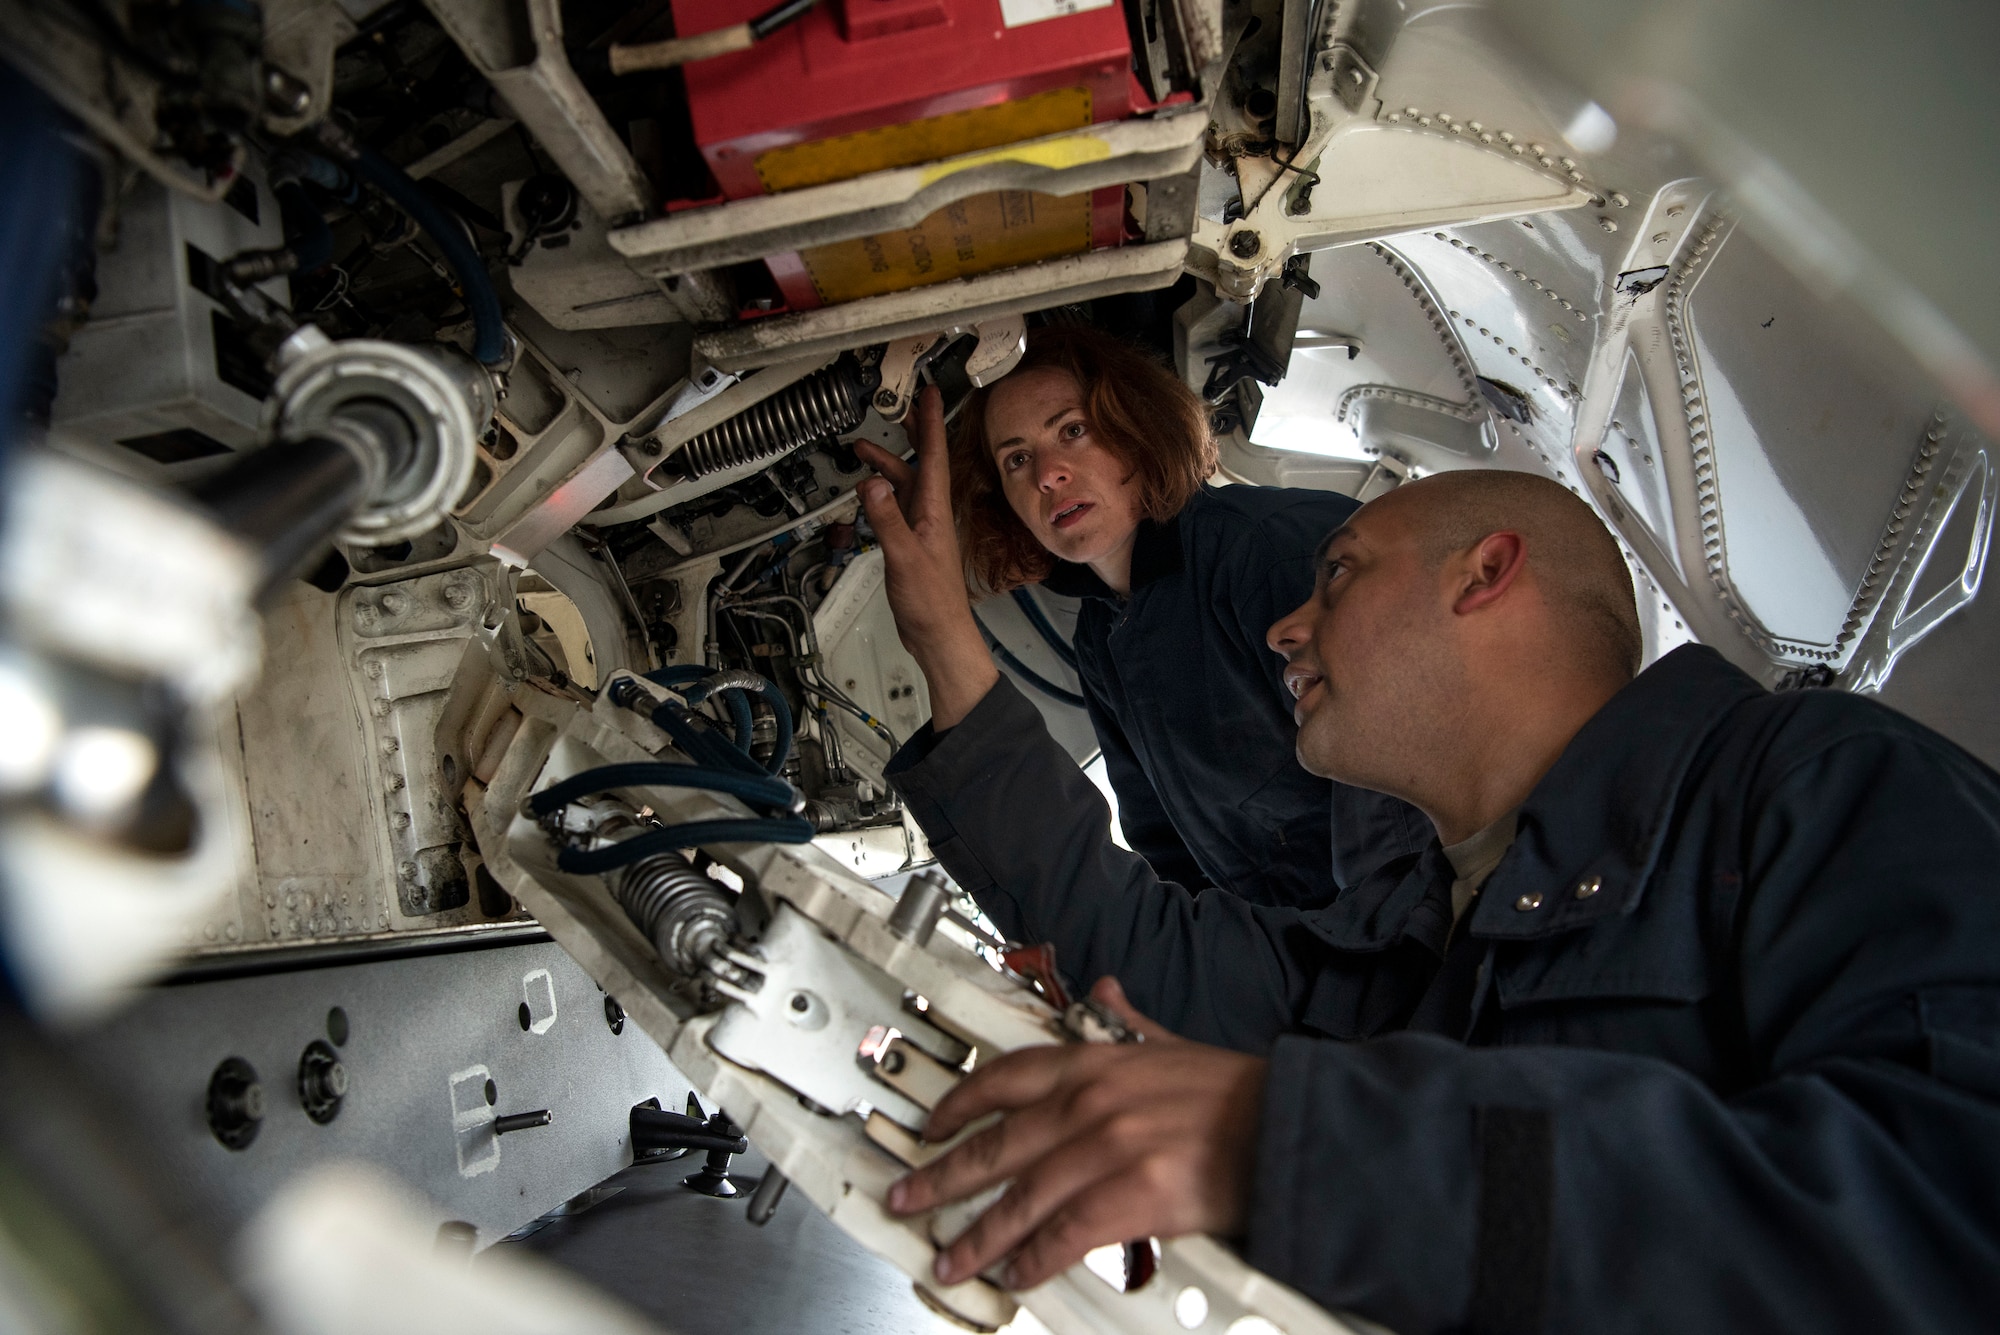 U.S. Air Force Staff Sgt. Stephanie Gillie, 52nd Security Forces Squadron investigator, center, learns how to inspect an aircraft from Senior Airman Jose Pagan, 52nd Aircraft Maintenance Squadron assistant dedicated crew chief, right, at Spangdahlem Air Base, Germany, April 3, 2019. The AMXS Crew Chief for a Day program allows Airmen to experience flightline operations. Gillie, who had never been on a flightline before, participated to gain a better understanding of the work maintainers perform. (U.S. Air Force photo by Airman 1st Class Valerie Seelye)